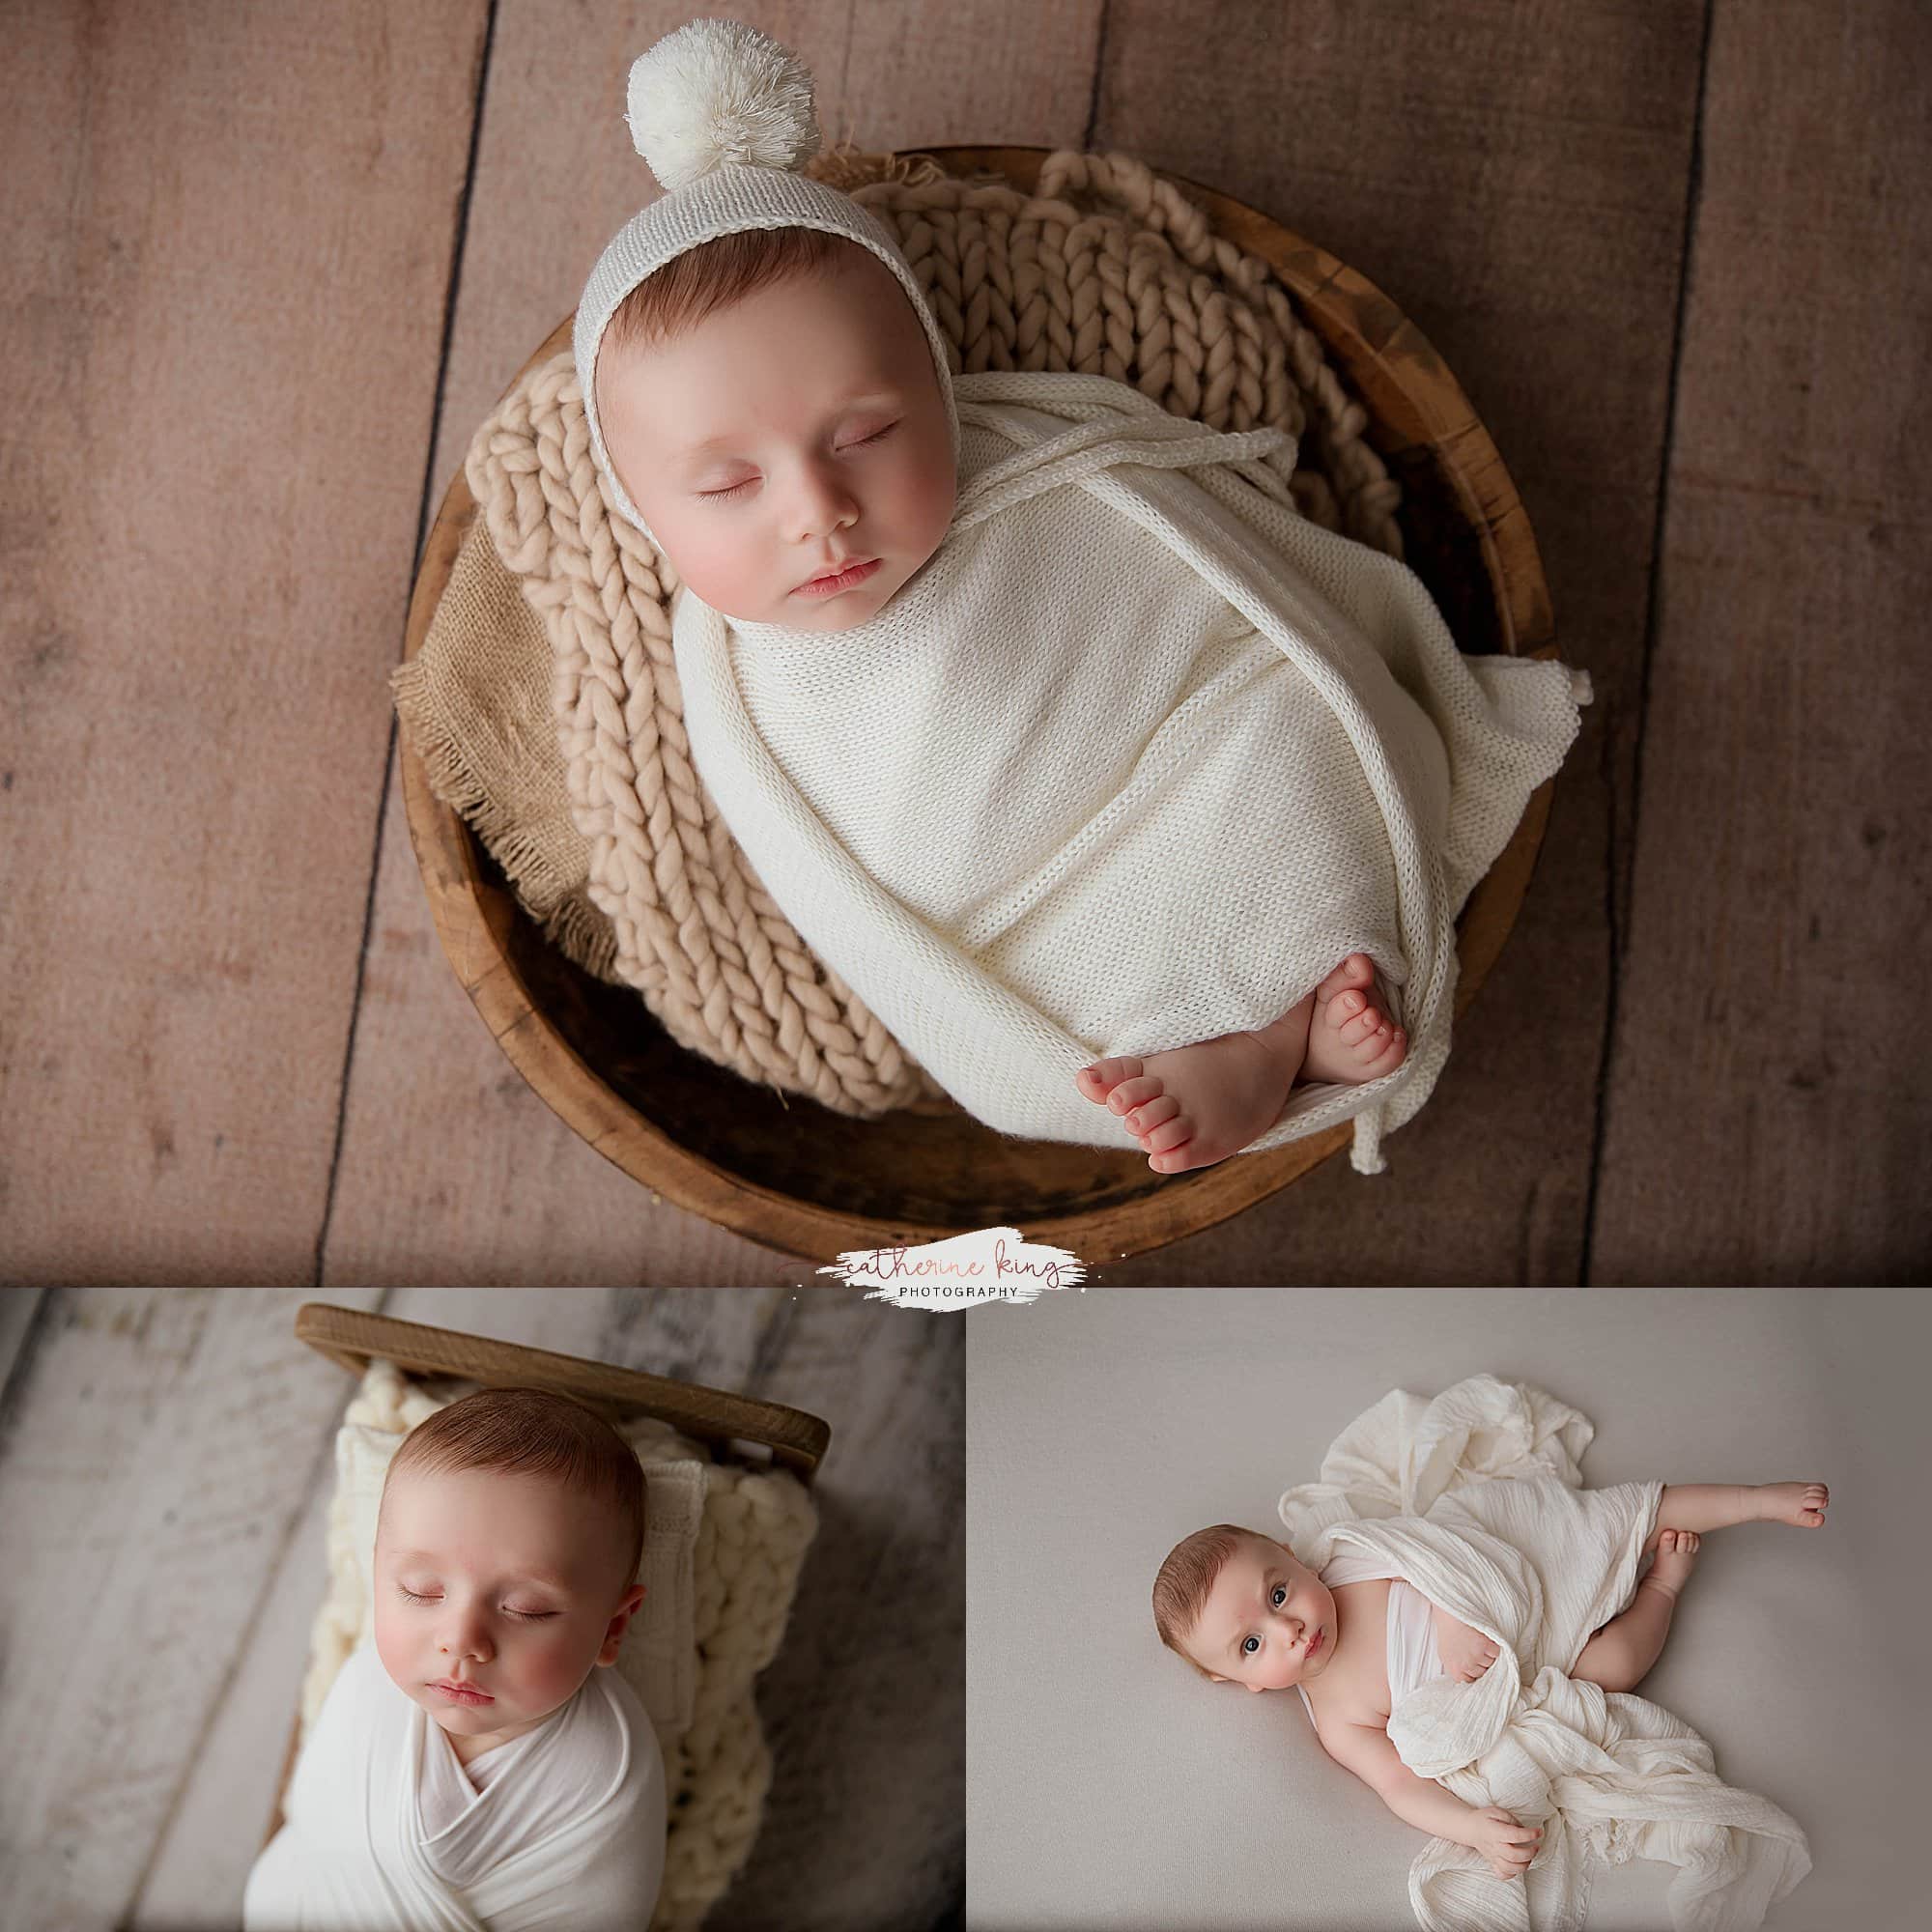 is it too late to book a newborn session if my baby was already born?